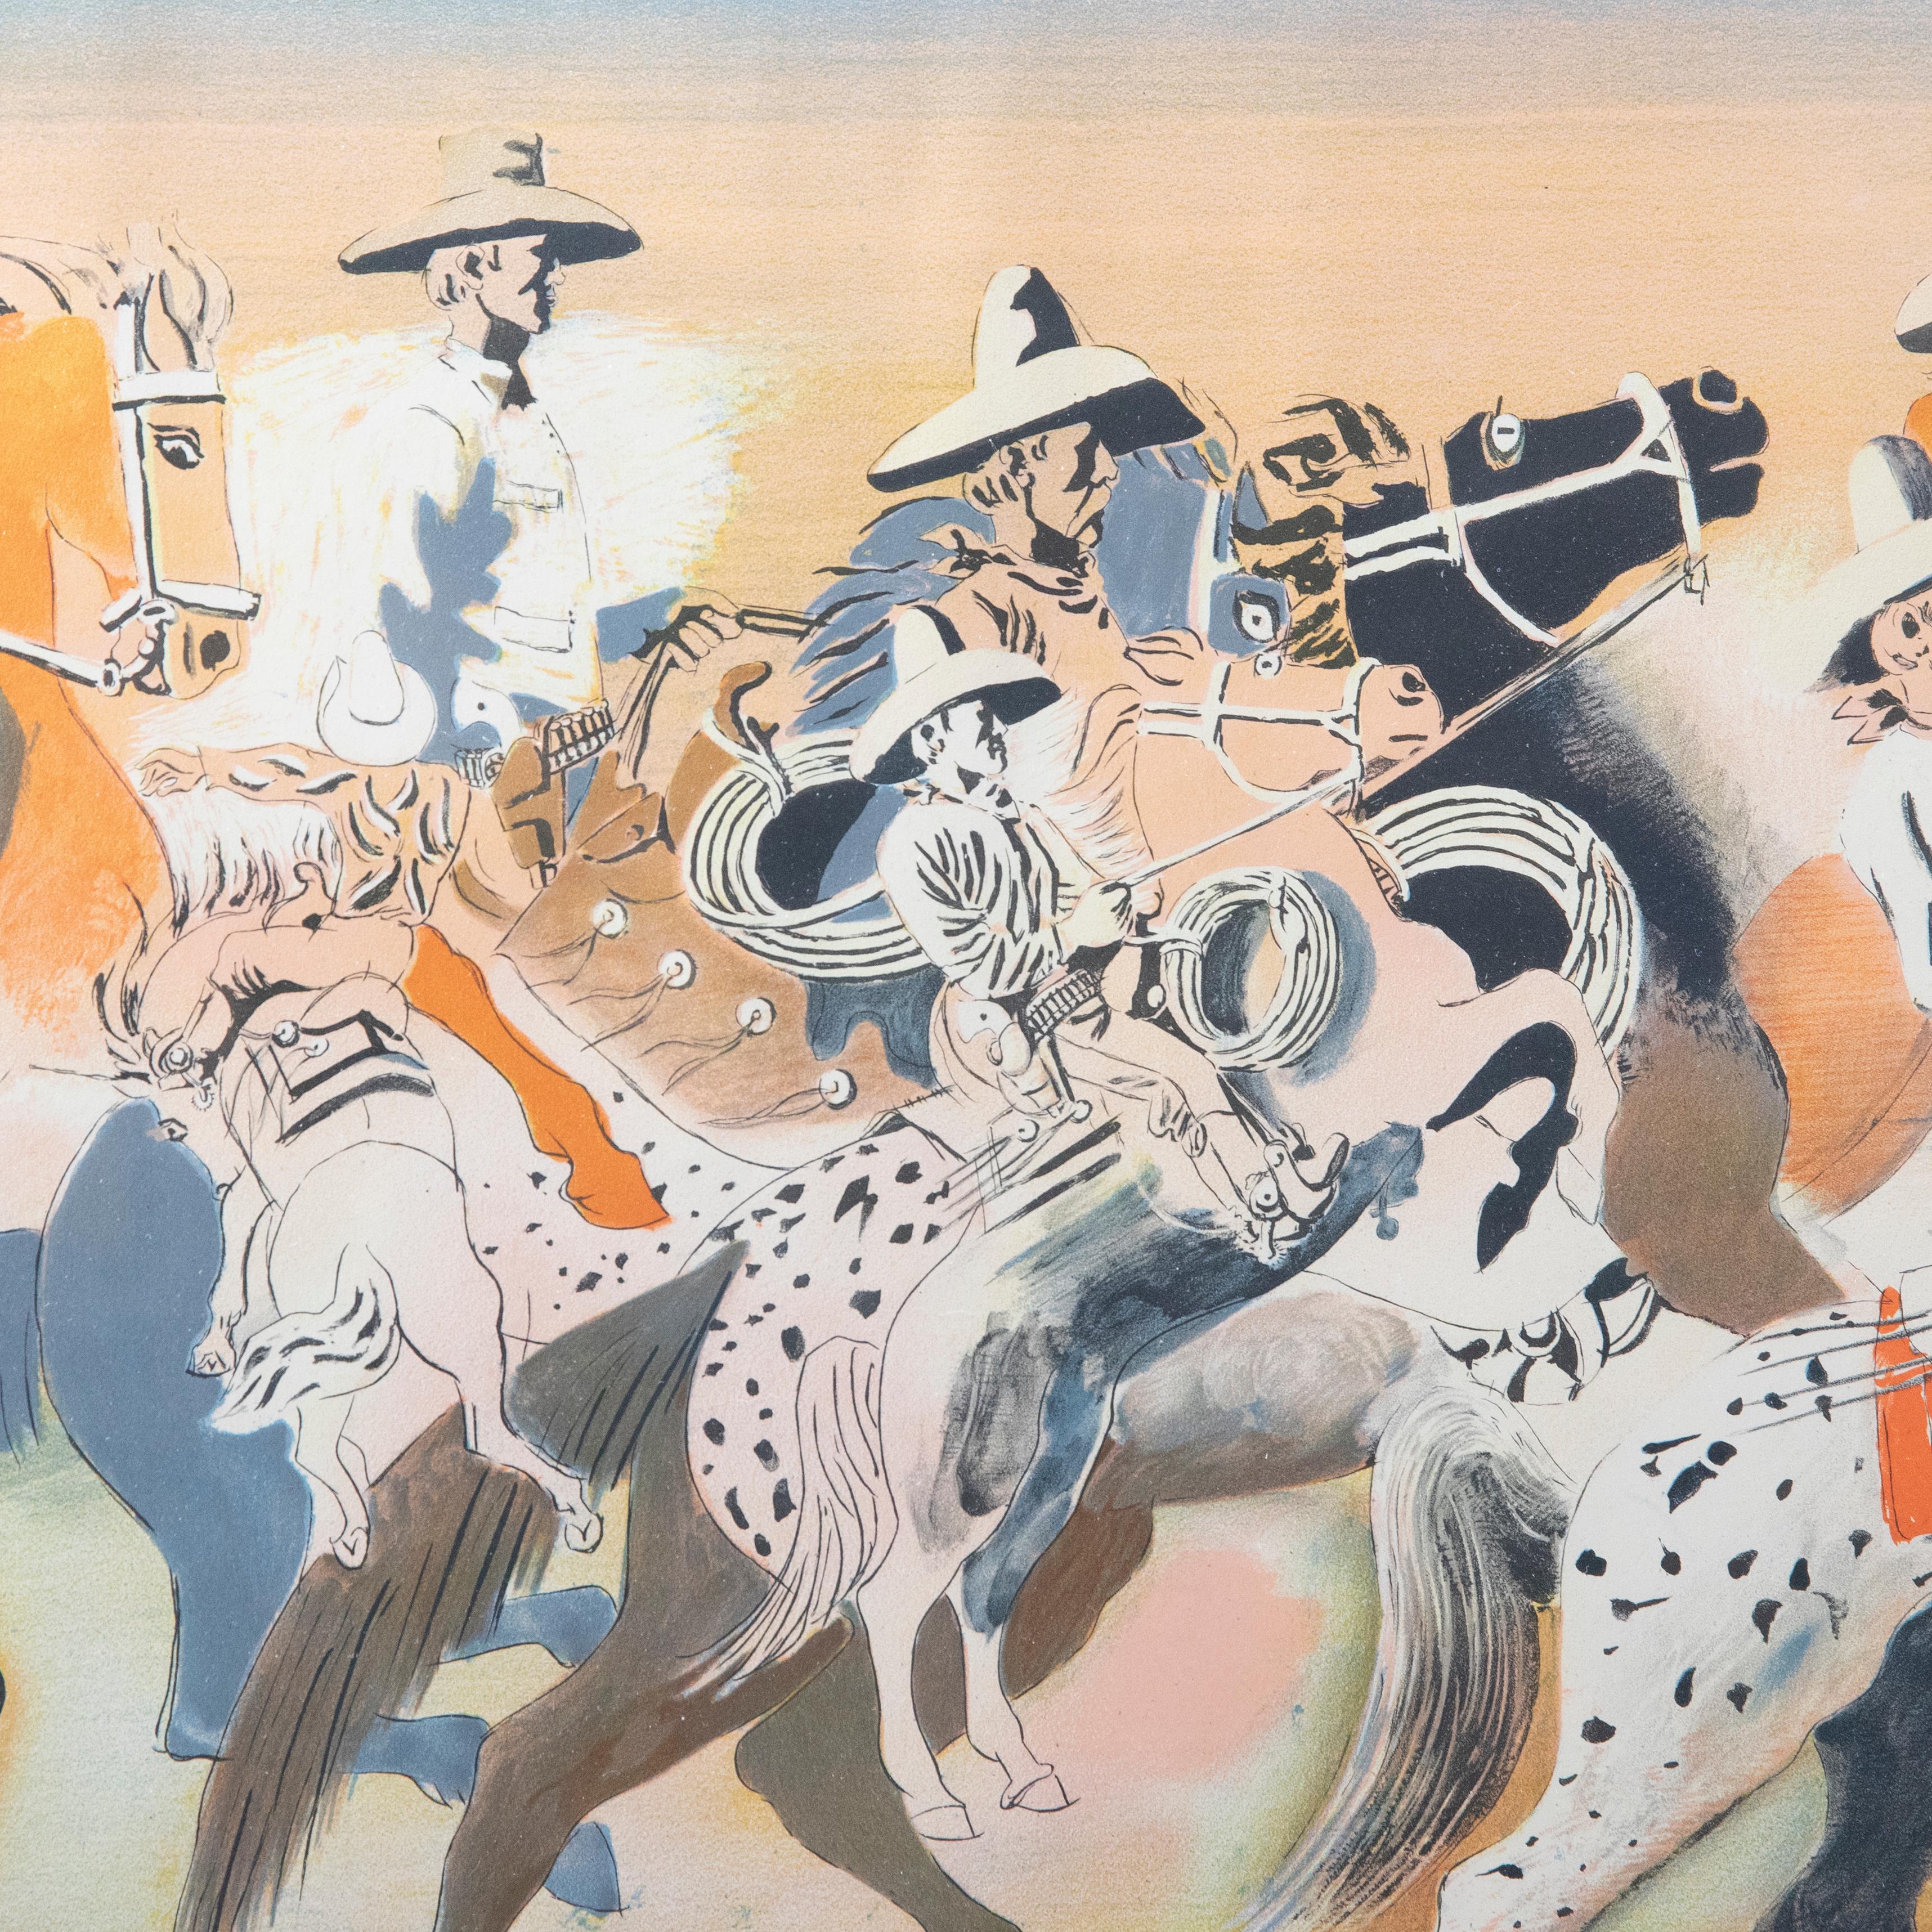 An original lithograph by american artist Eduard Buk Ulreich. Titled- 'Arizona Cowboys'. The print was published in England by Baynard press for school prints Ltd. Part of a set of 24 lithographs produced in the 1940s with the intention of bringing